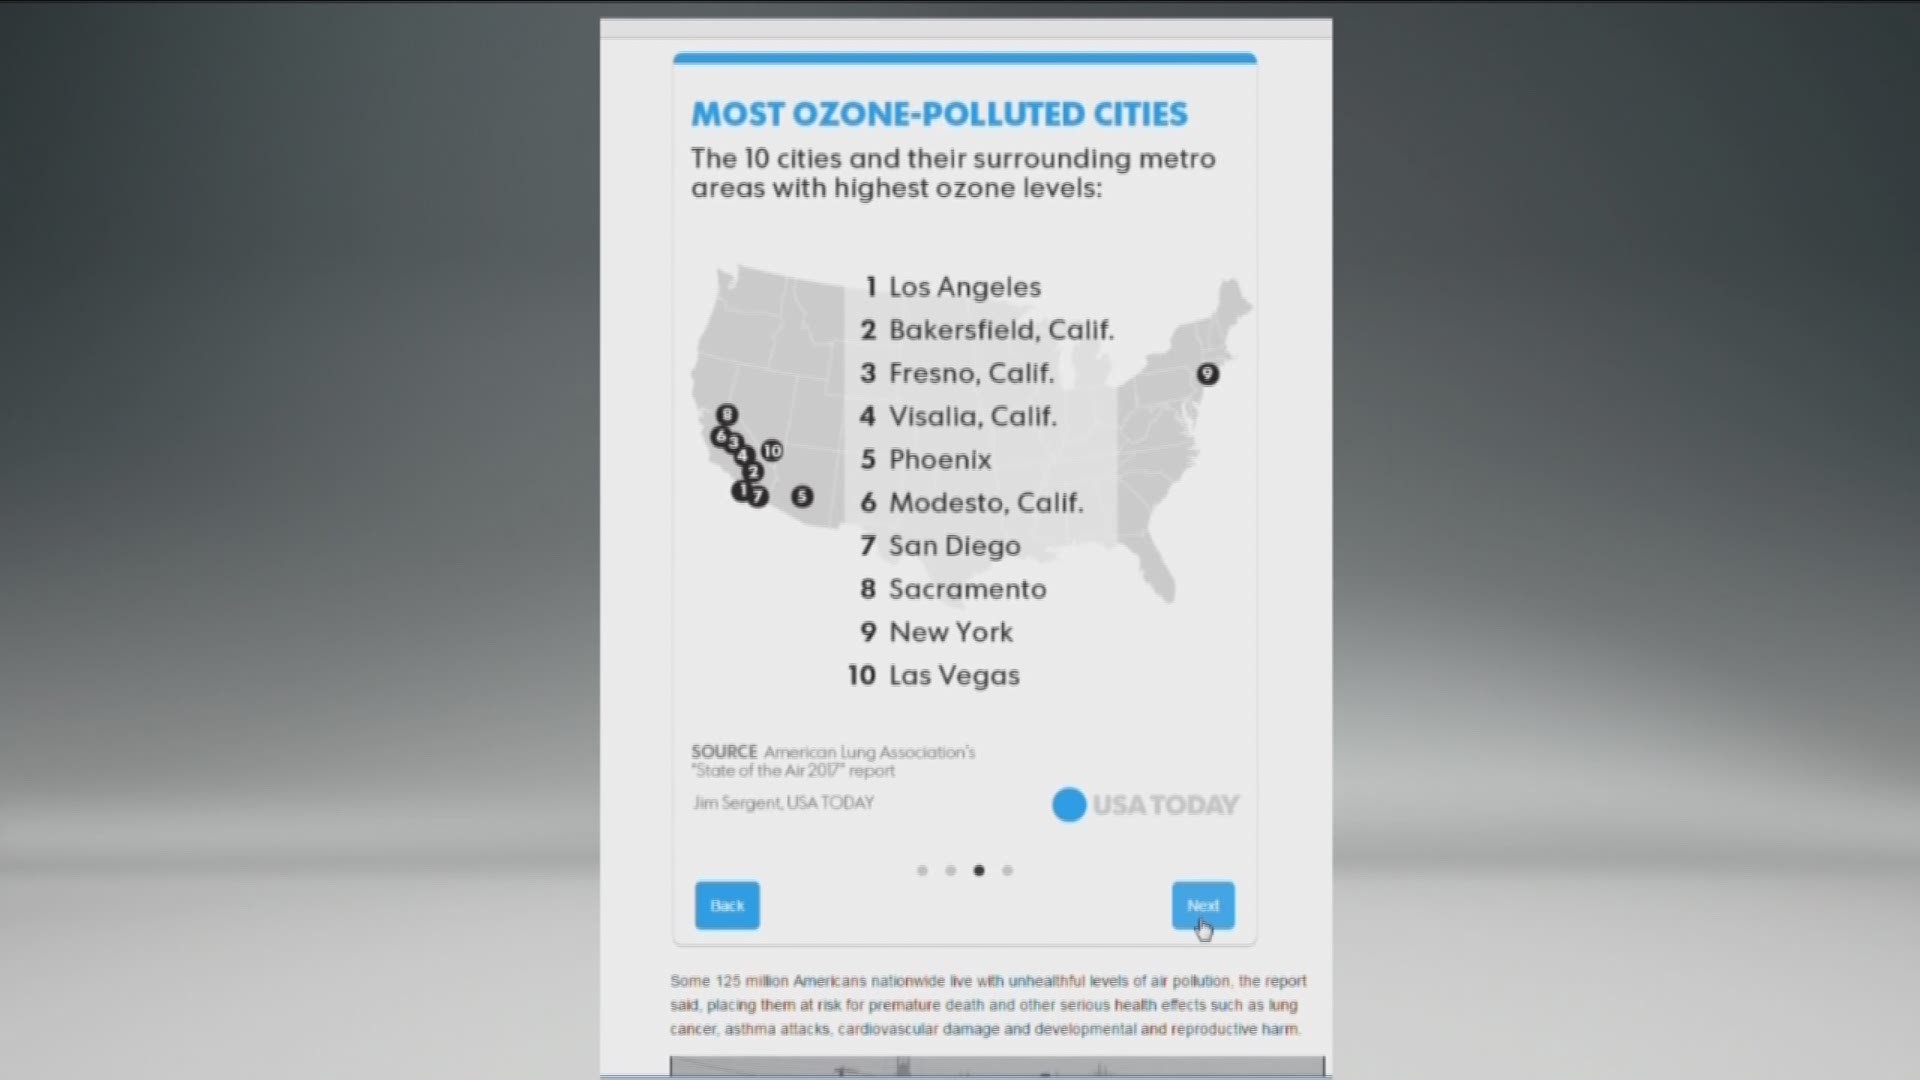 California leads the nation with 6 of the top 10 most polluted U.S. cities, according to the American Lung Association's annual "State of the Air" report.